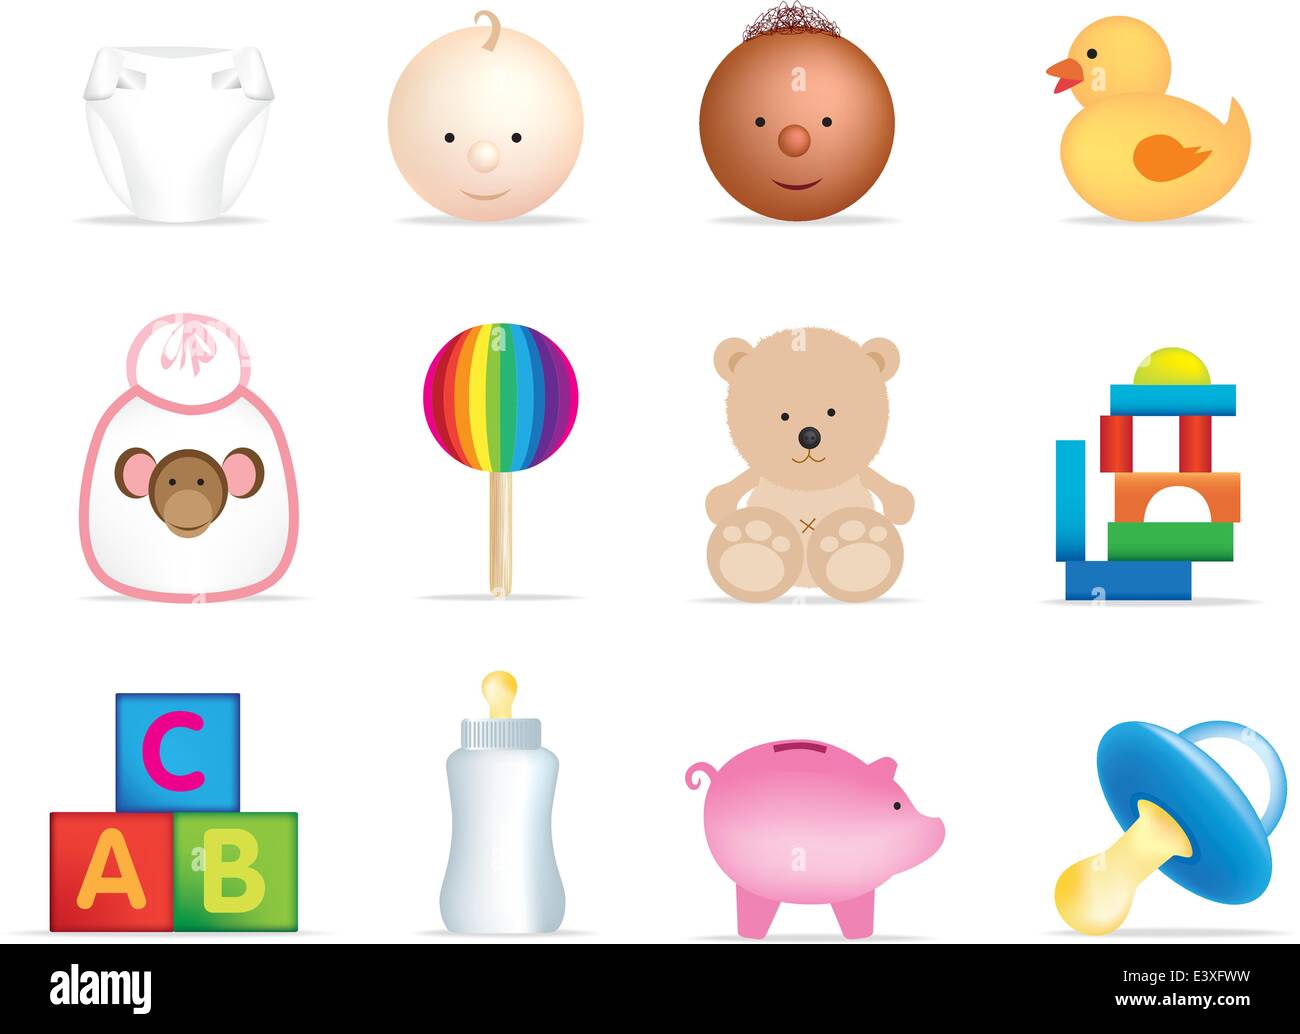 set of illustrations of baby objects and toys Stock Vector